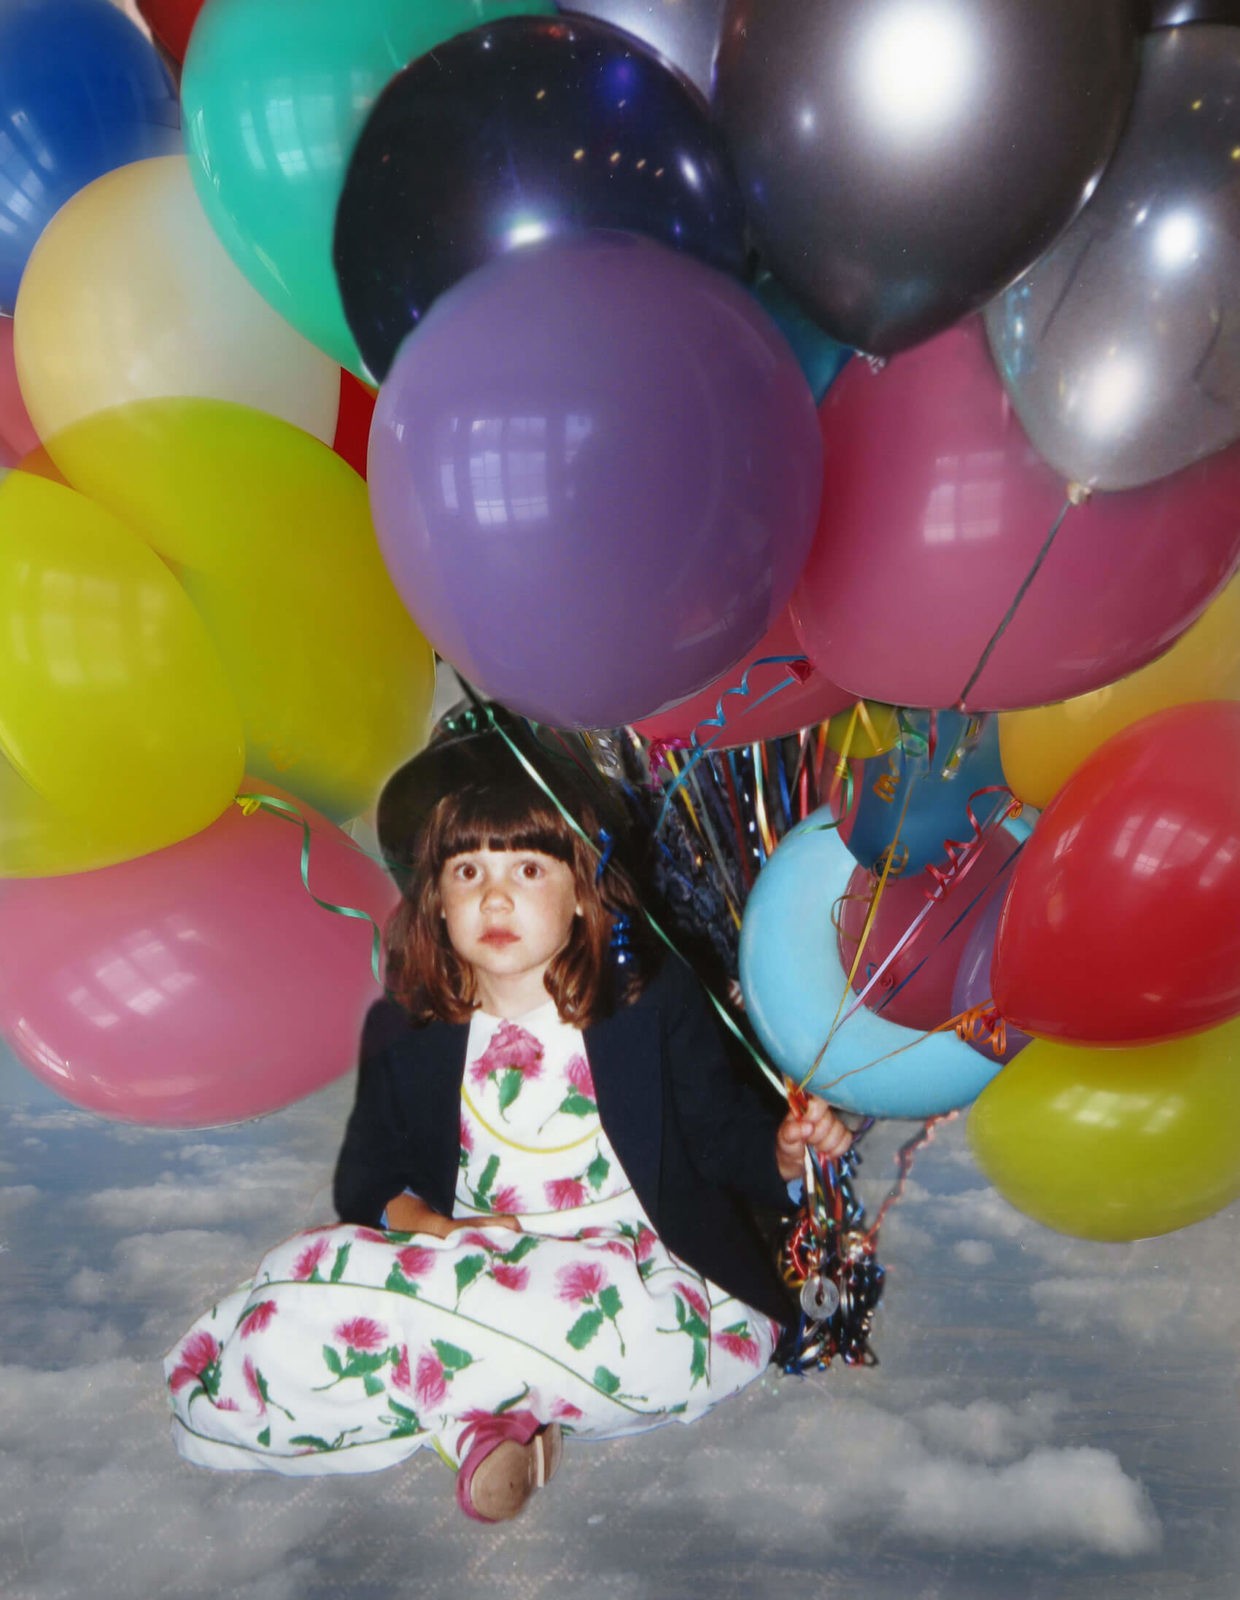 Robin Botie in Ithaca, New york, Photoshops her daughter who died of leukemia as a young girl surrounded by balloons